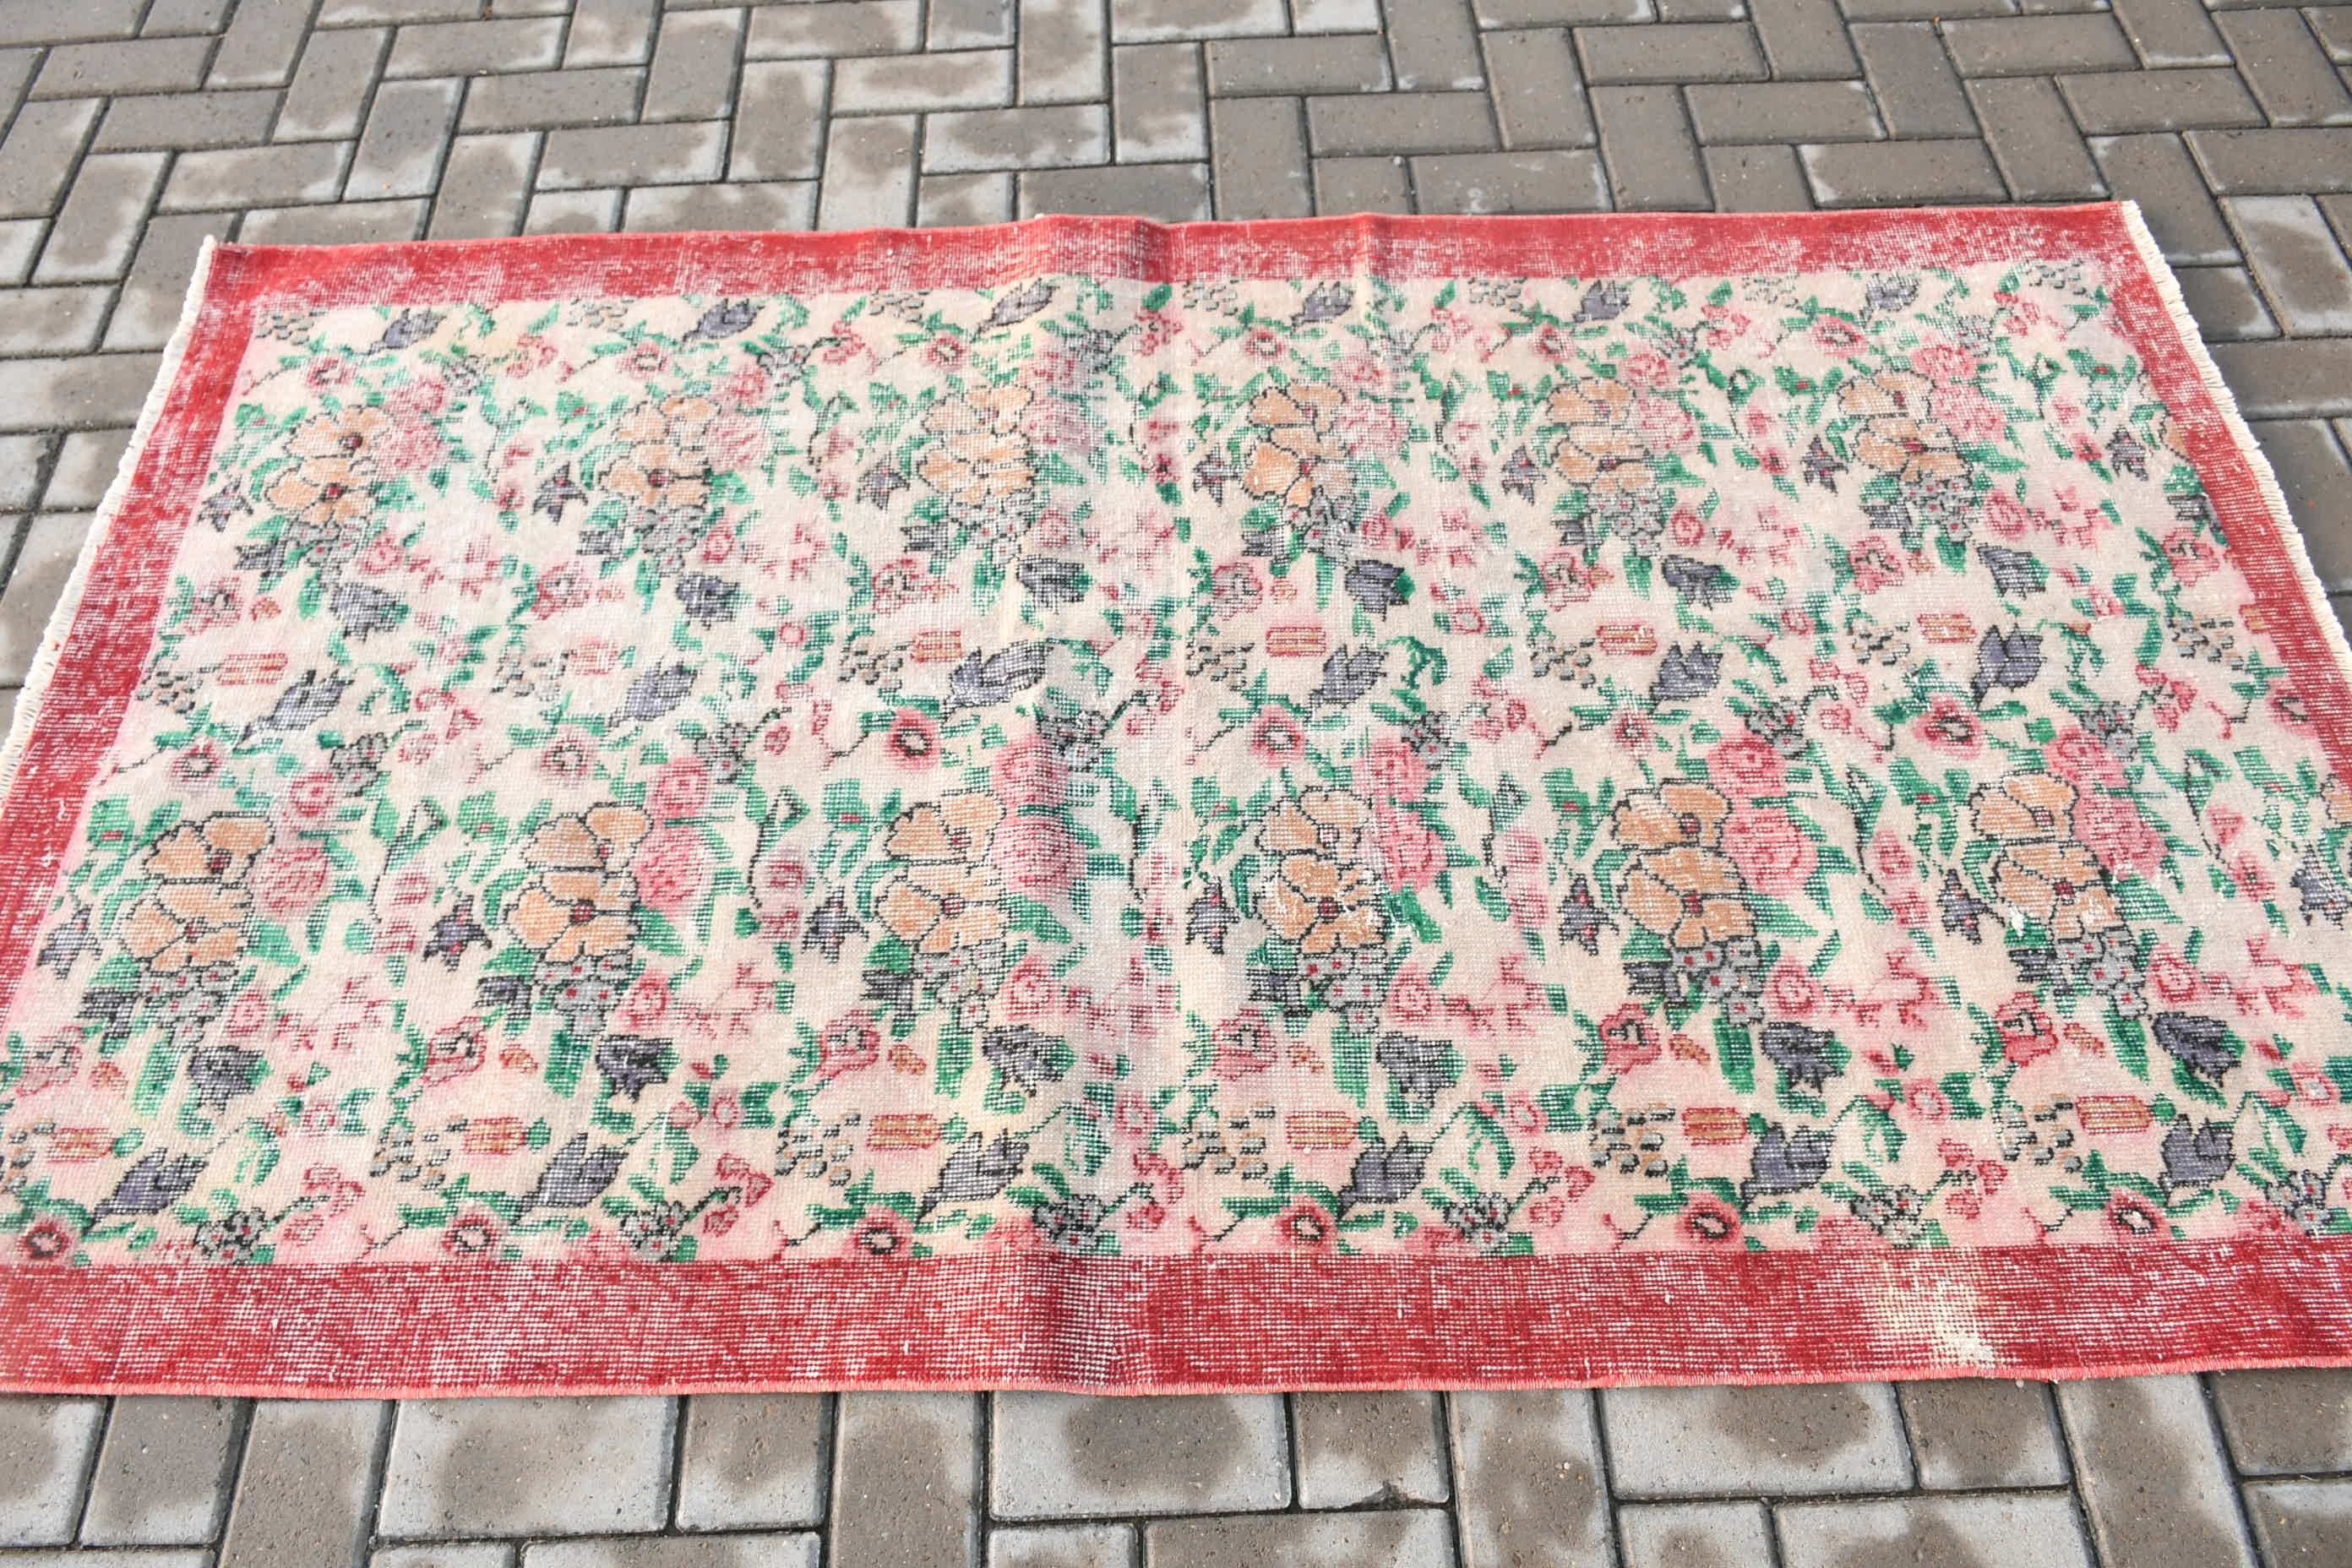 Vintage Rug, Kitchen Rug, Oriental Rug, Turkish Rug, Entry Rug, Red Moroccan Rugs, Rugs for Kitchen, 3.7x6.4 ft Accent Rug